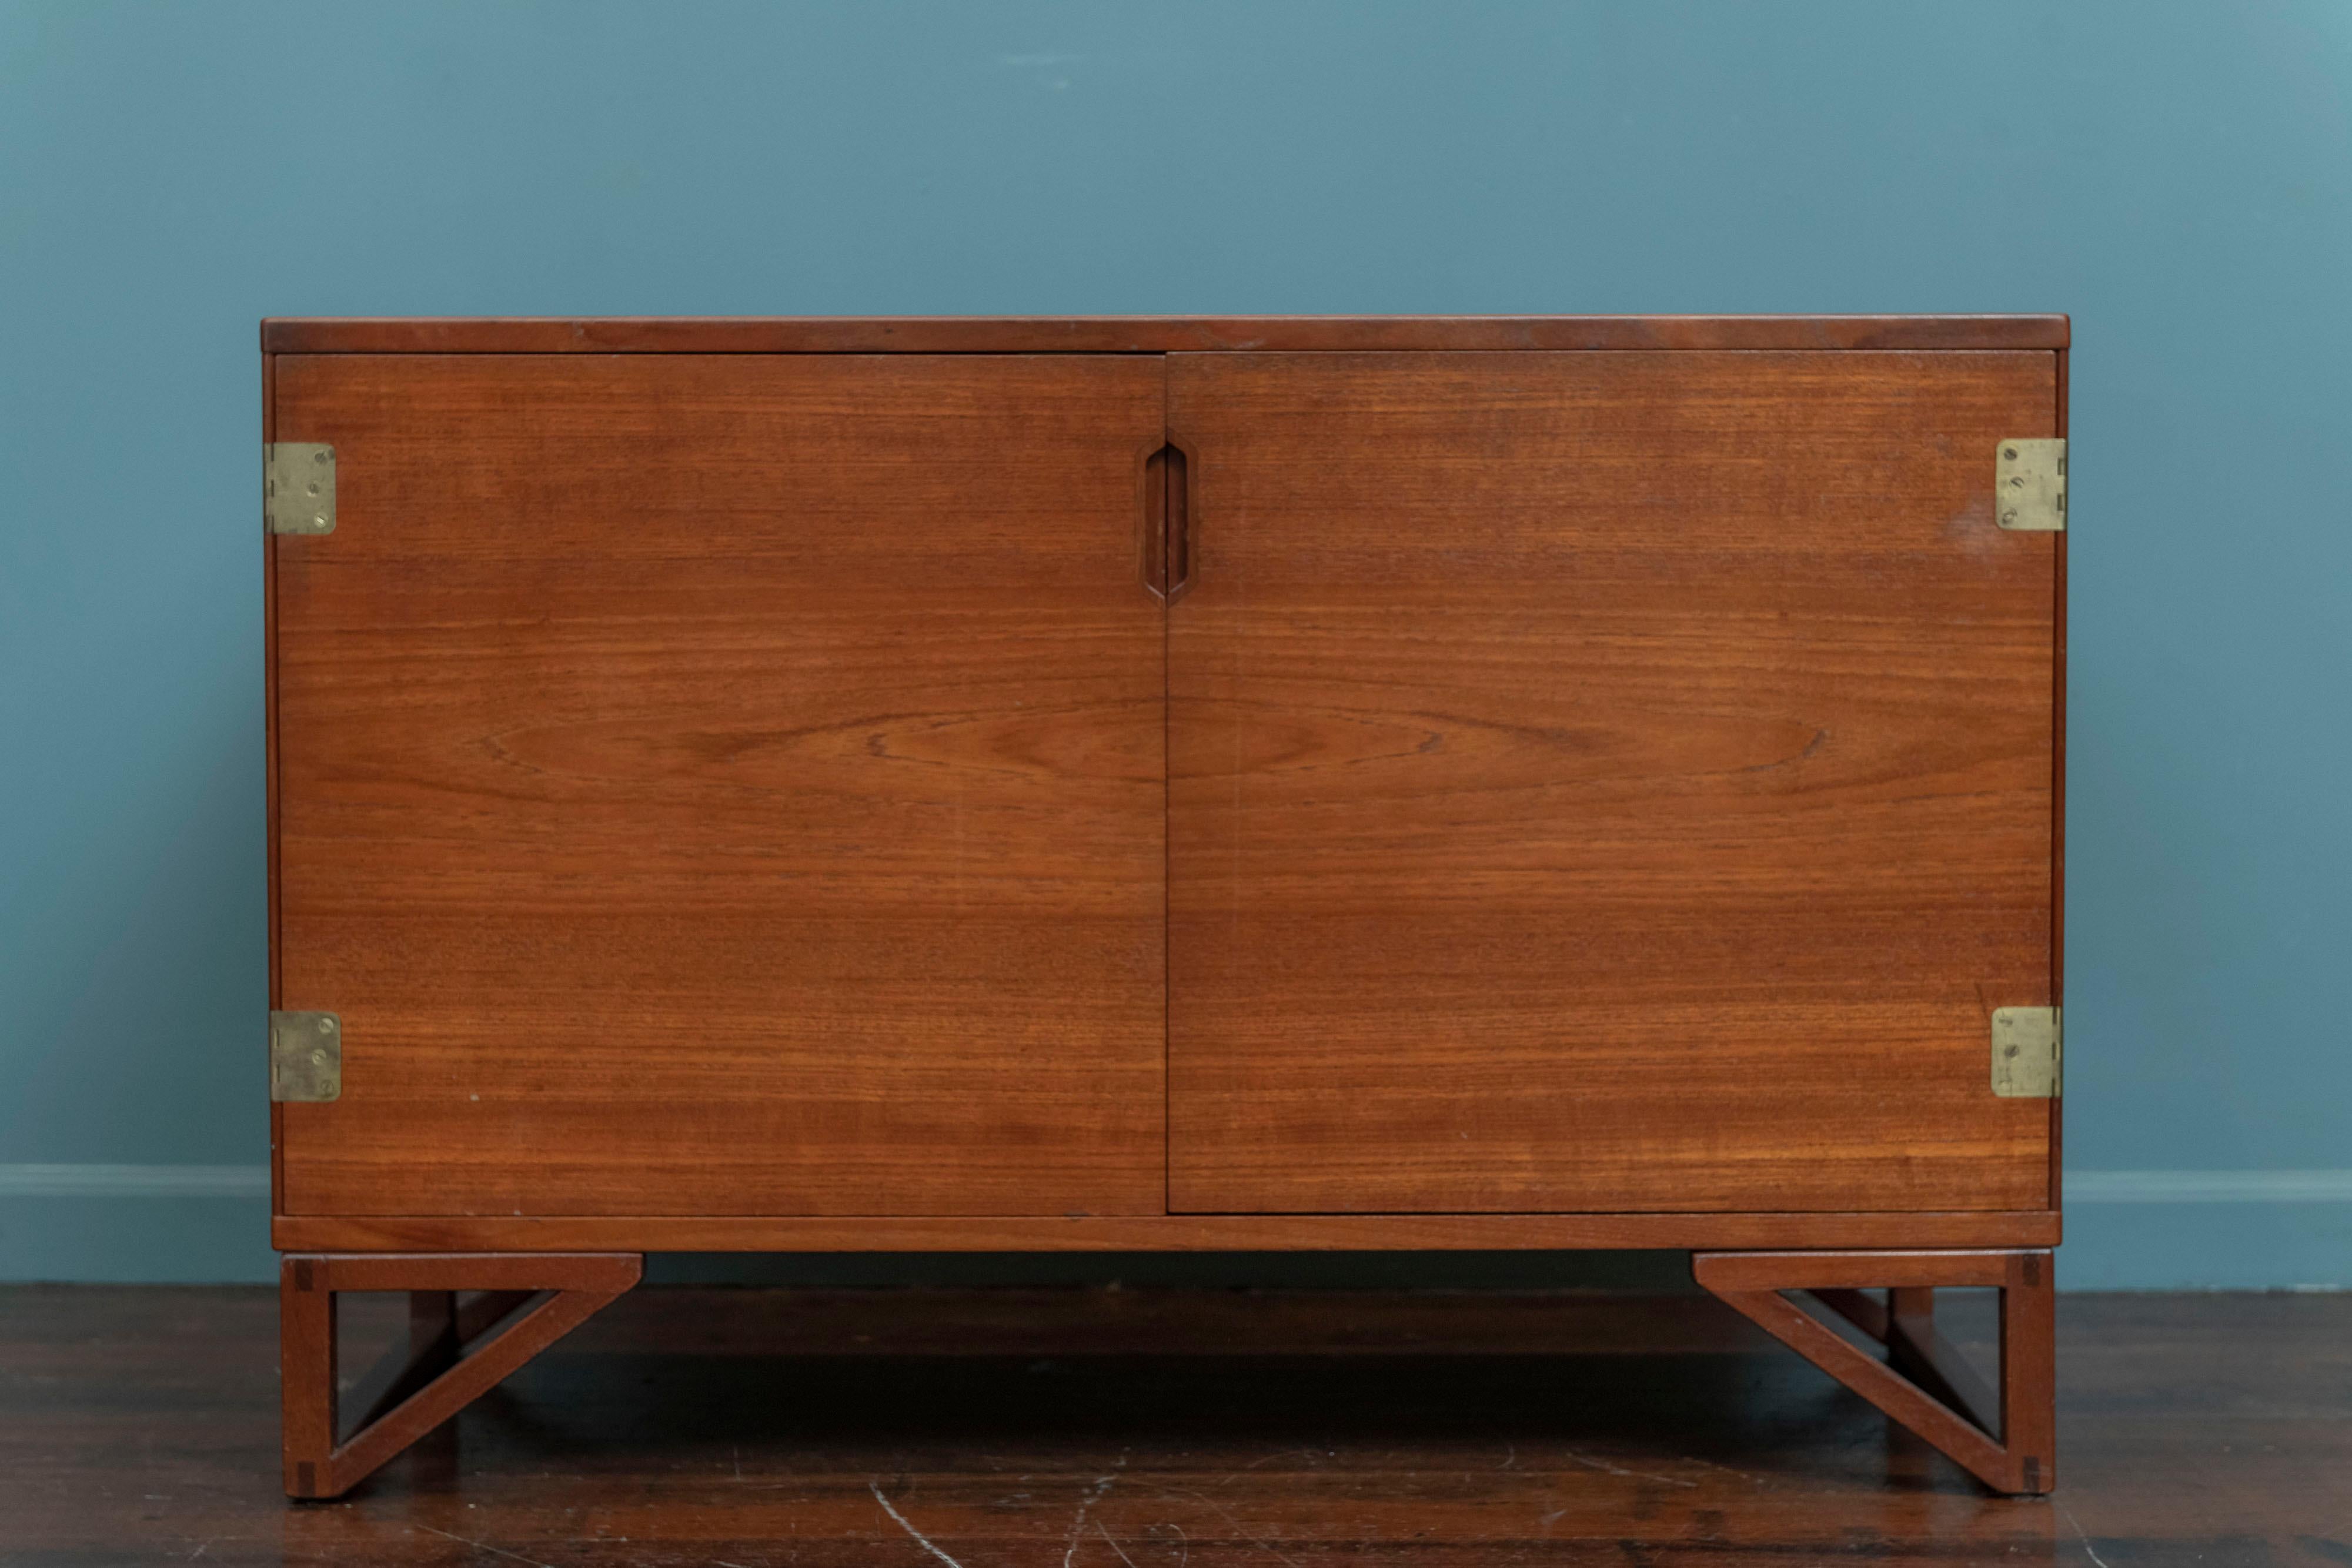 Svend Langkilde design two door teak cabinet for Langklide Mobler, Denmark. High quality construction and use of materials, featuring two doors with inset brass hinges and a fitted adjustable interior. In very good original condition that is ready